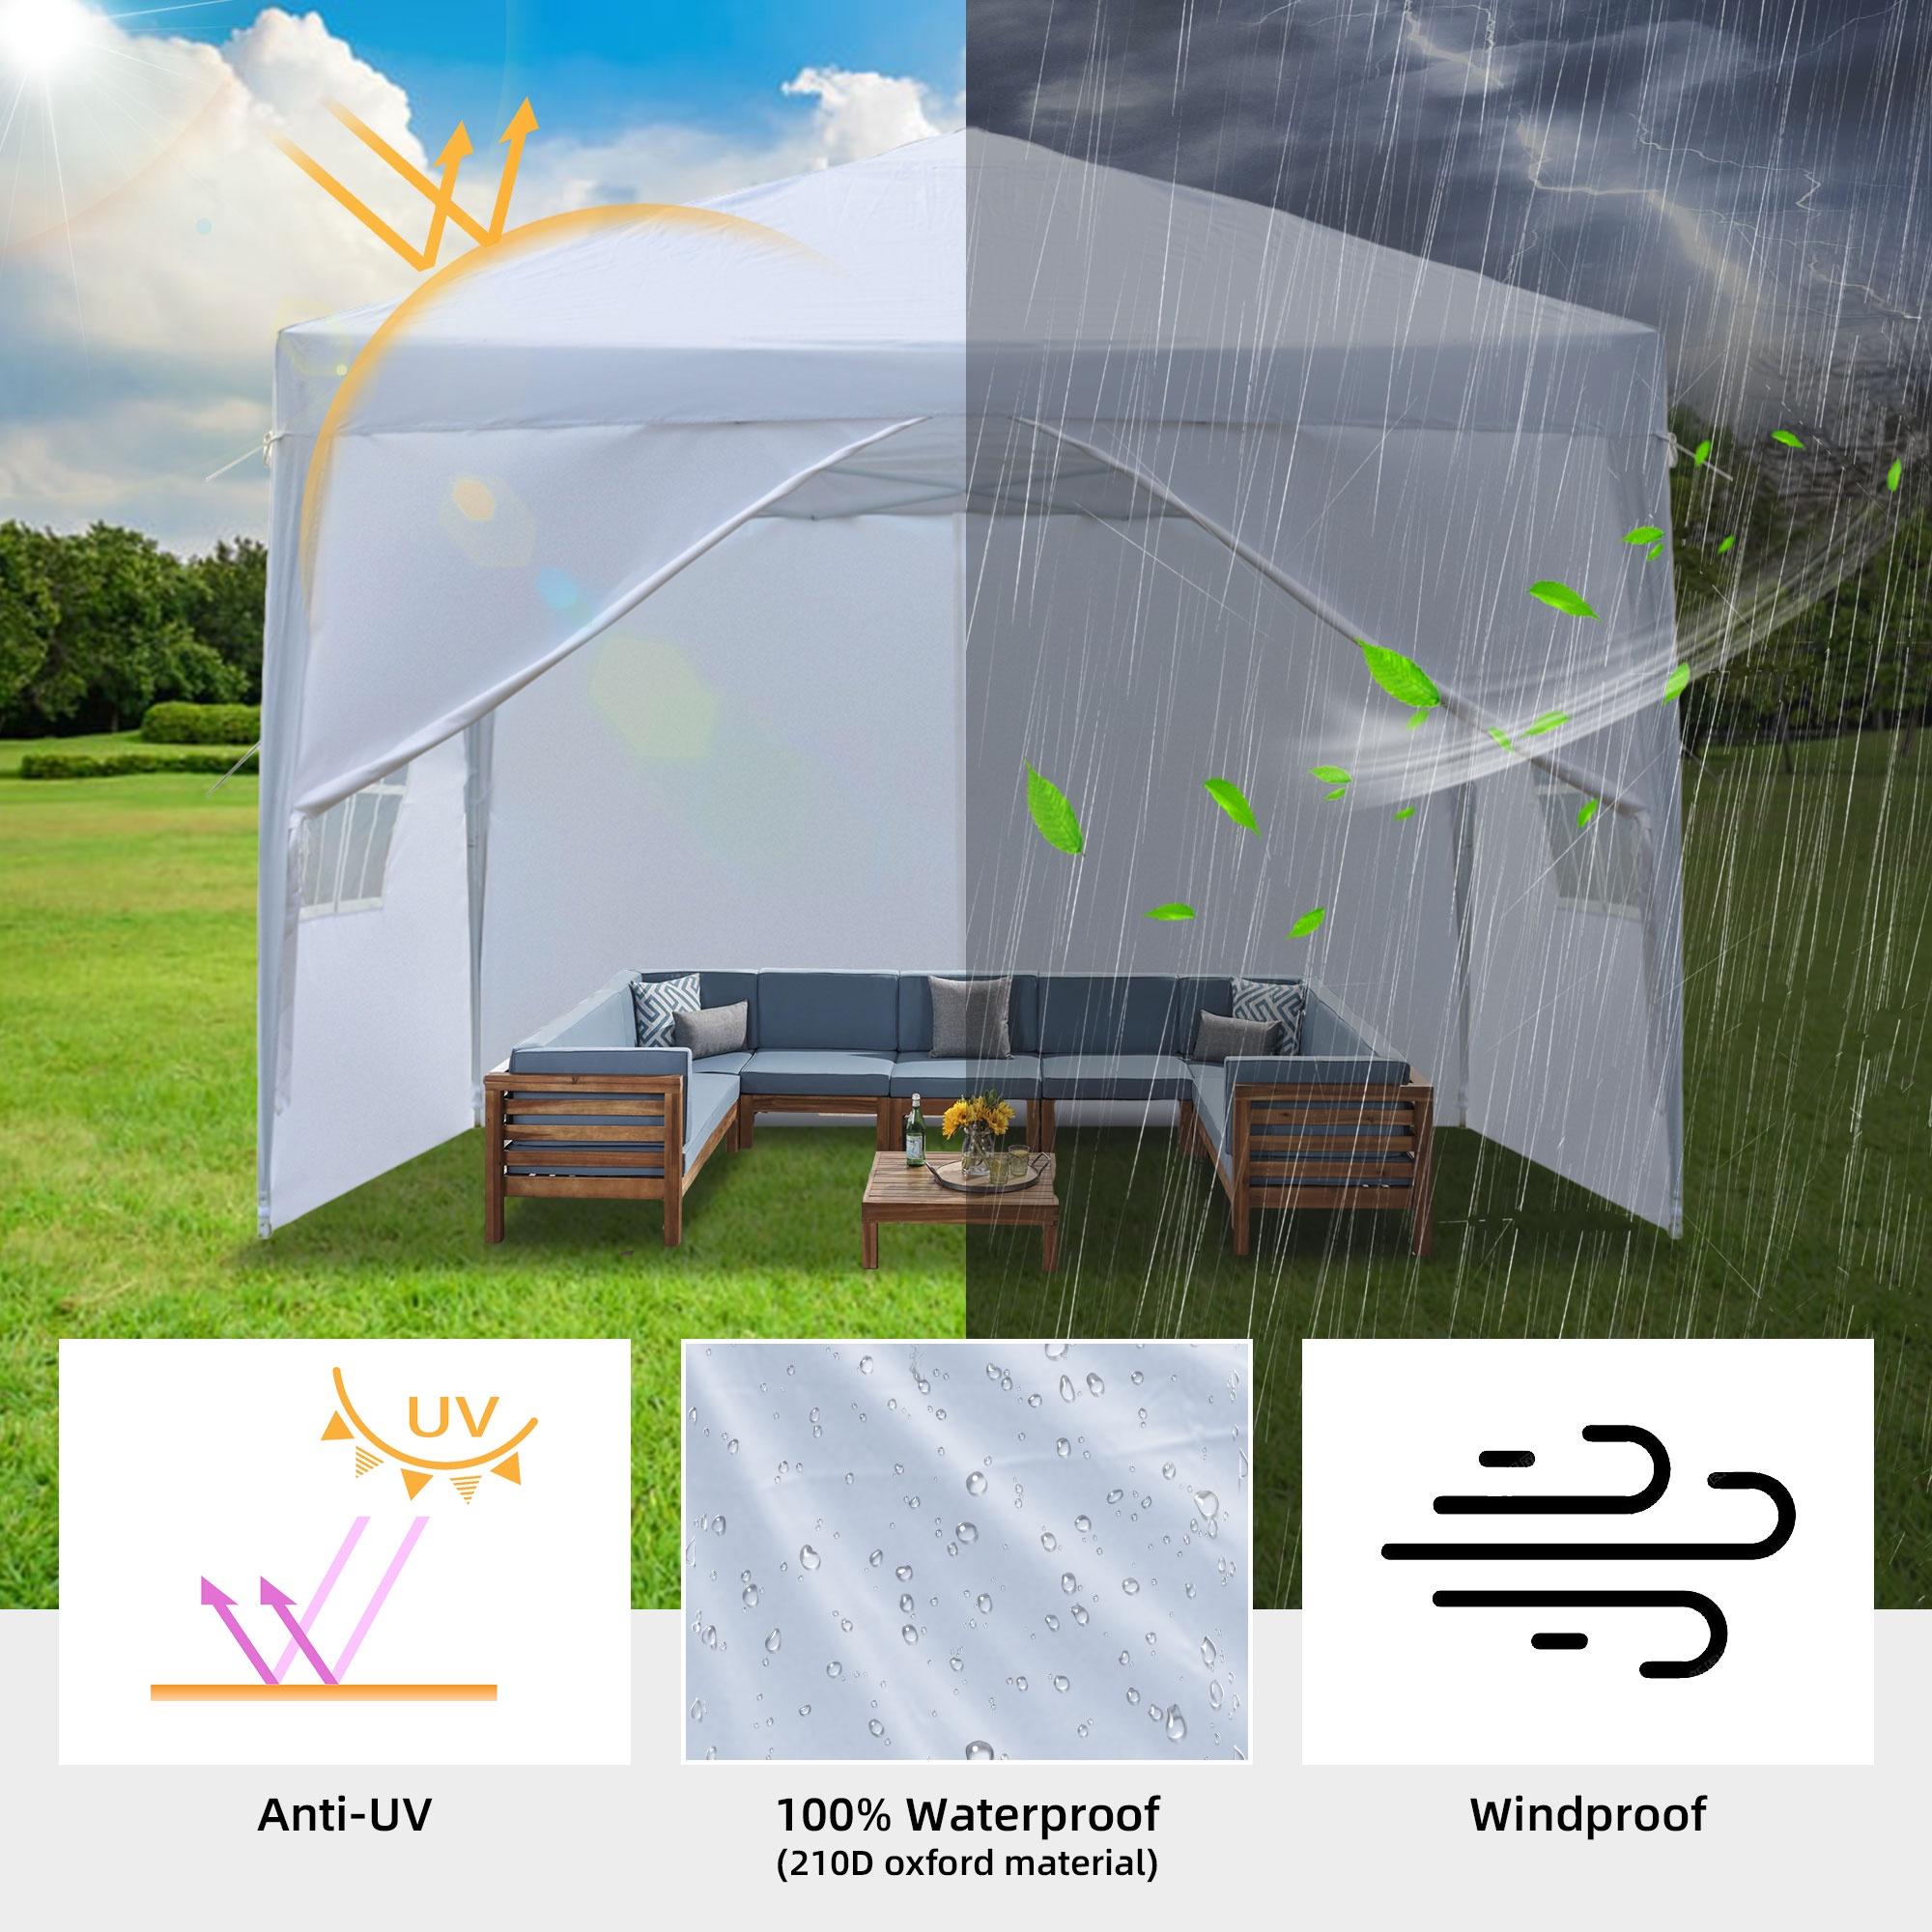 10'x10' Outdoor Wedding Party Tent with 4 Sidewalls, SEGMART Pop Up Canopy Tent with 3 Adjustable Heights, Portable Waterproof Instant Patio Gazebo Tent with Carrying Bag for Garden Pavilion - image 5 of 9